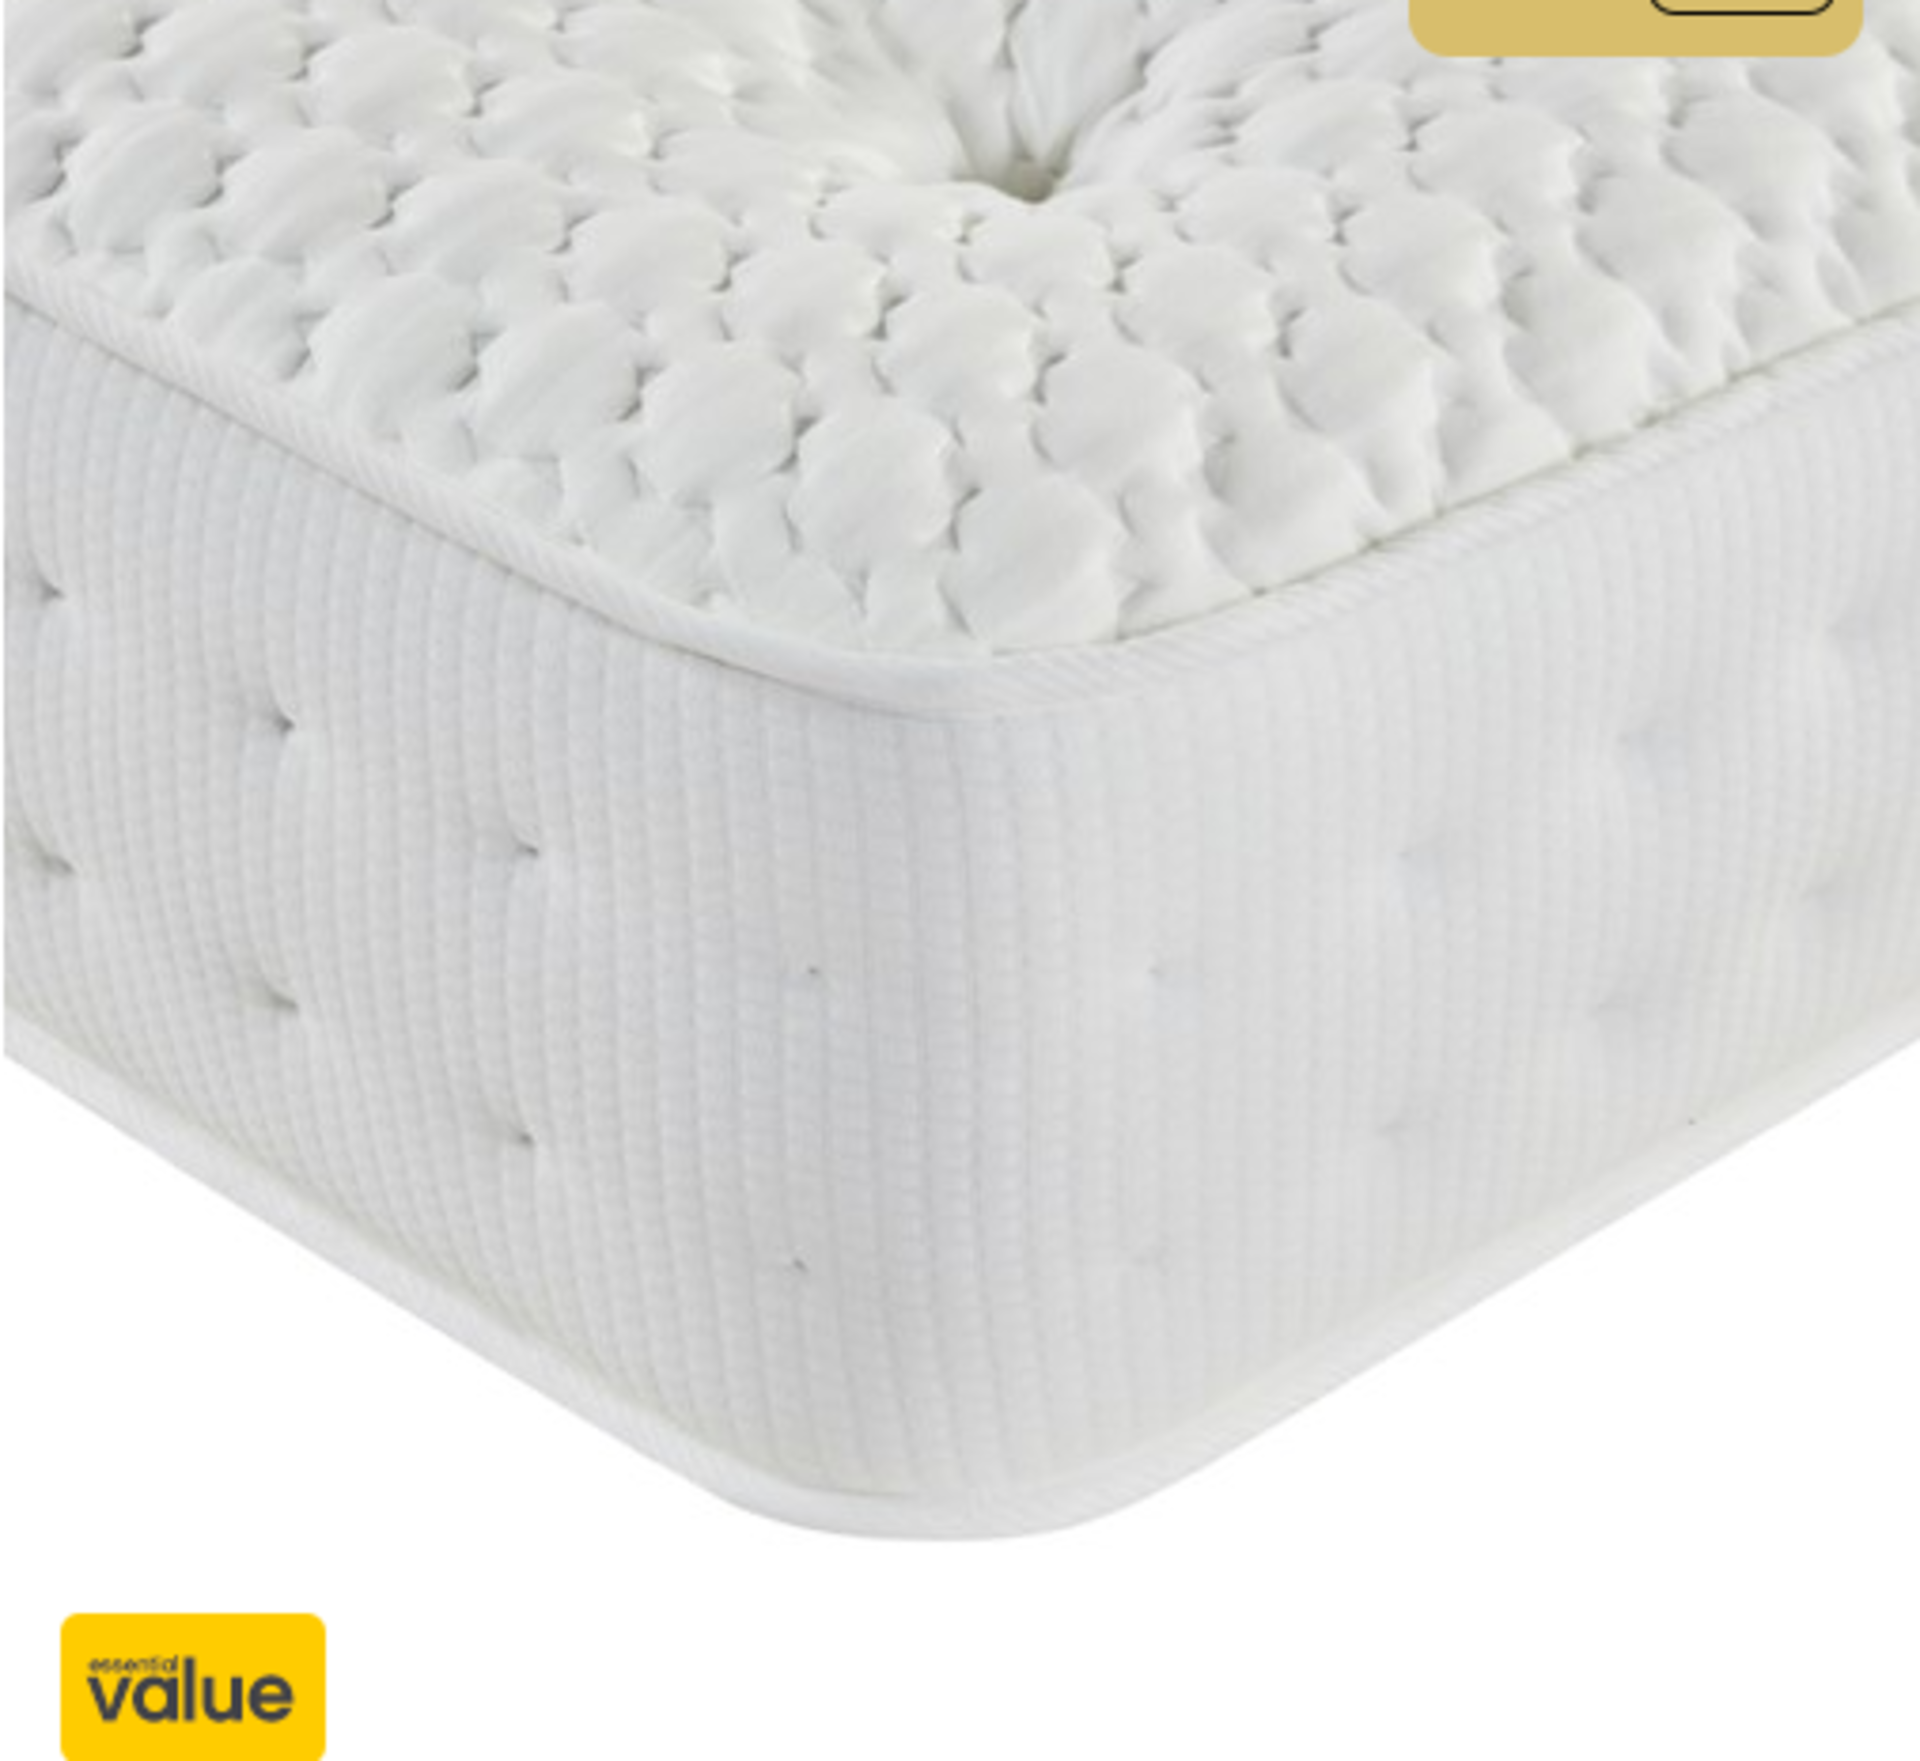 | 1X | SLEEPEEZEE LORENZA BED MATTRESS 5FT KING SIZE | LOOKS TO BE IN GOOD CONDITION WITH